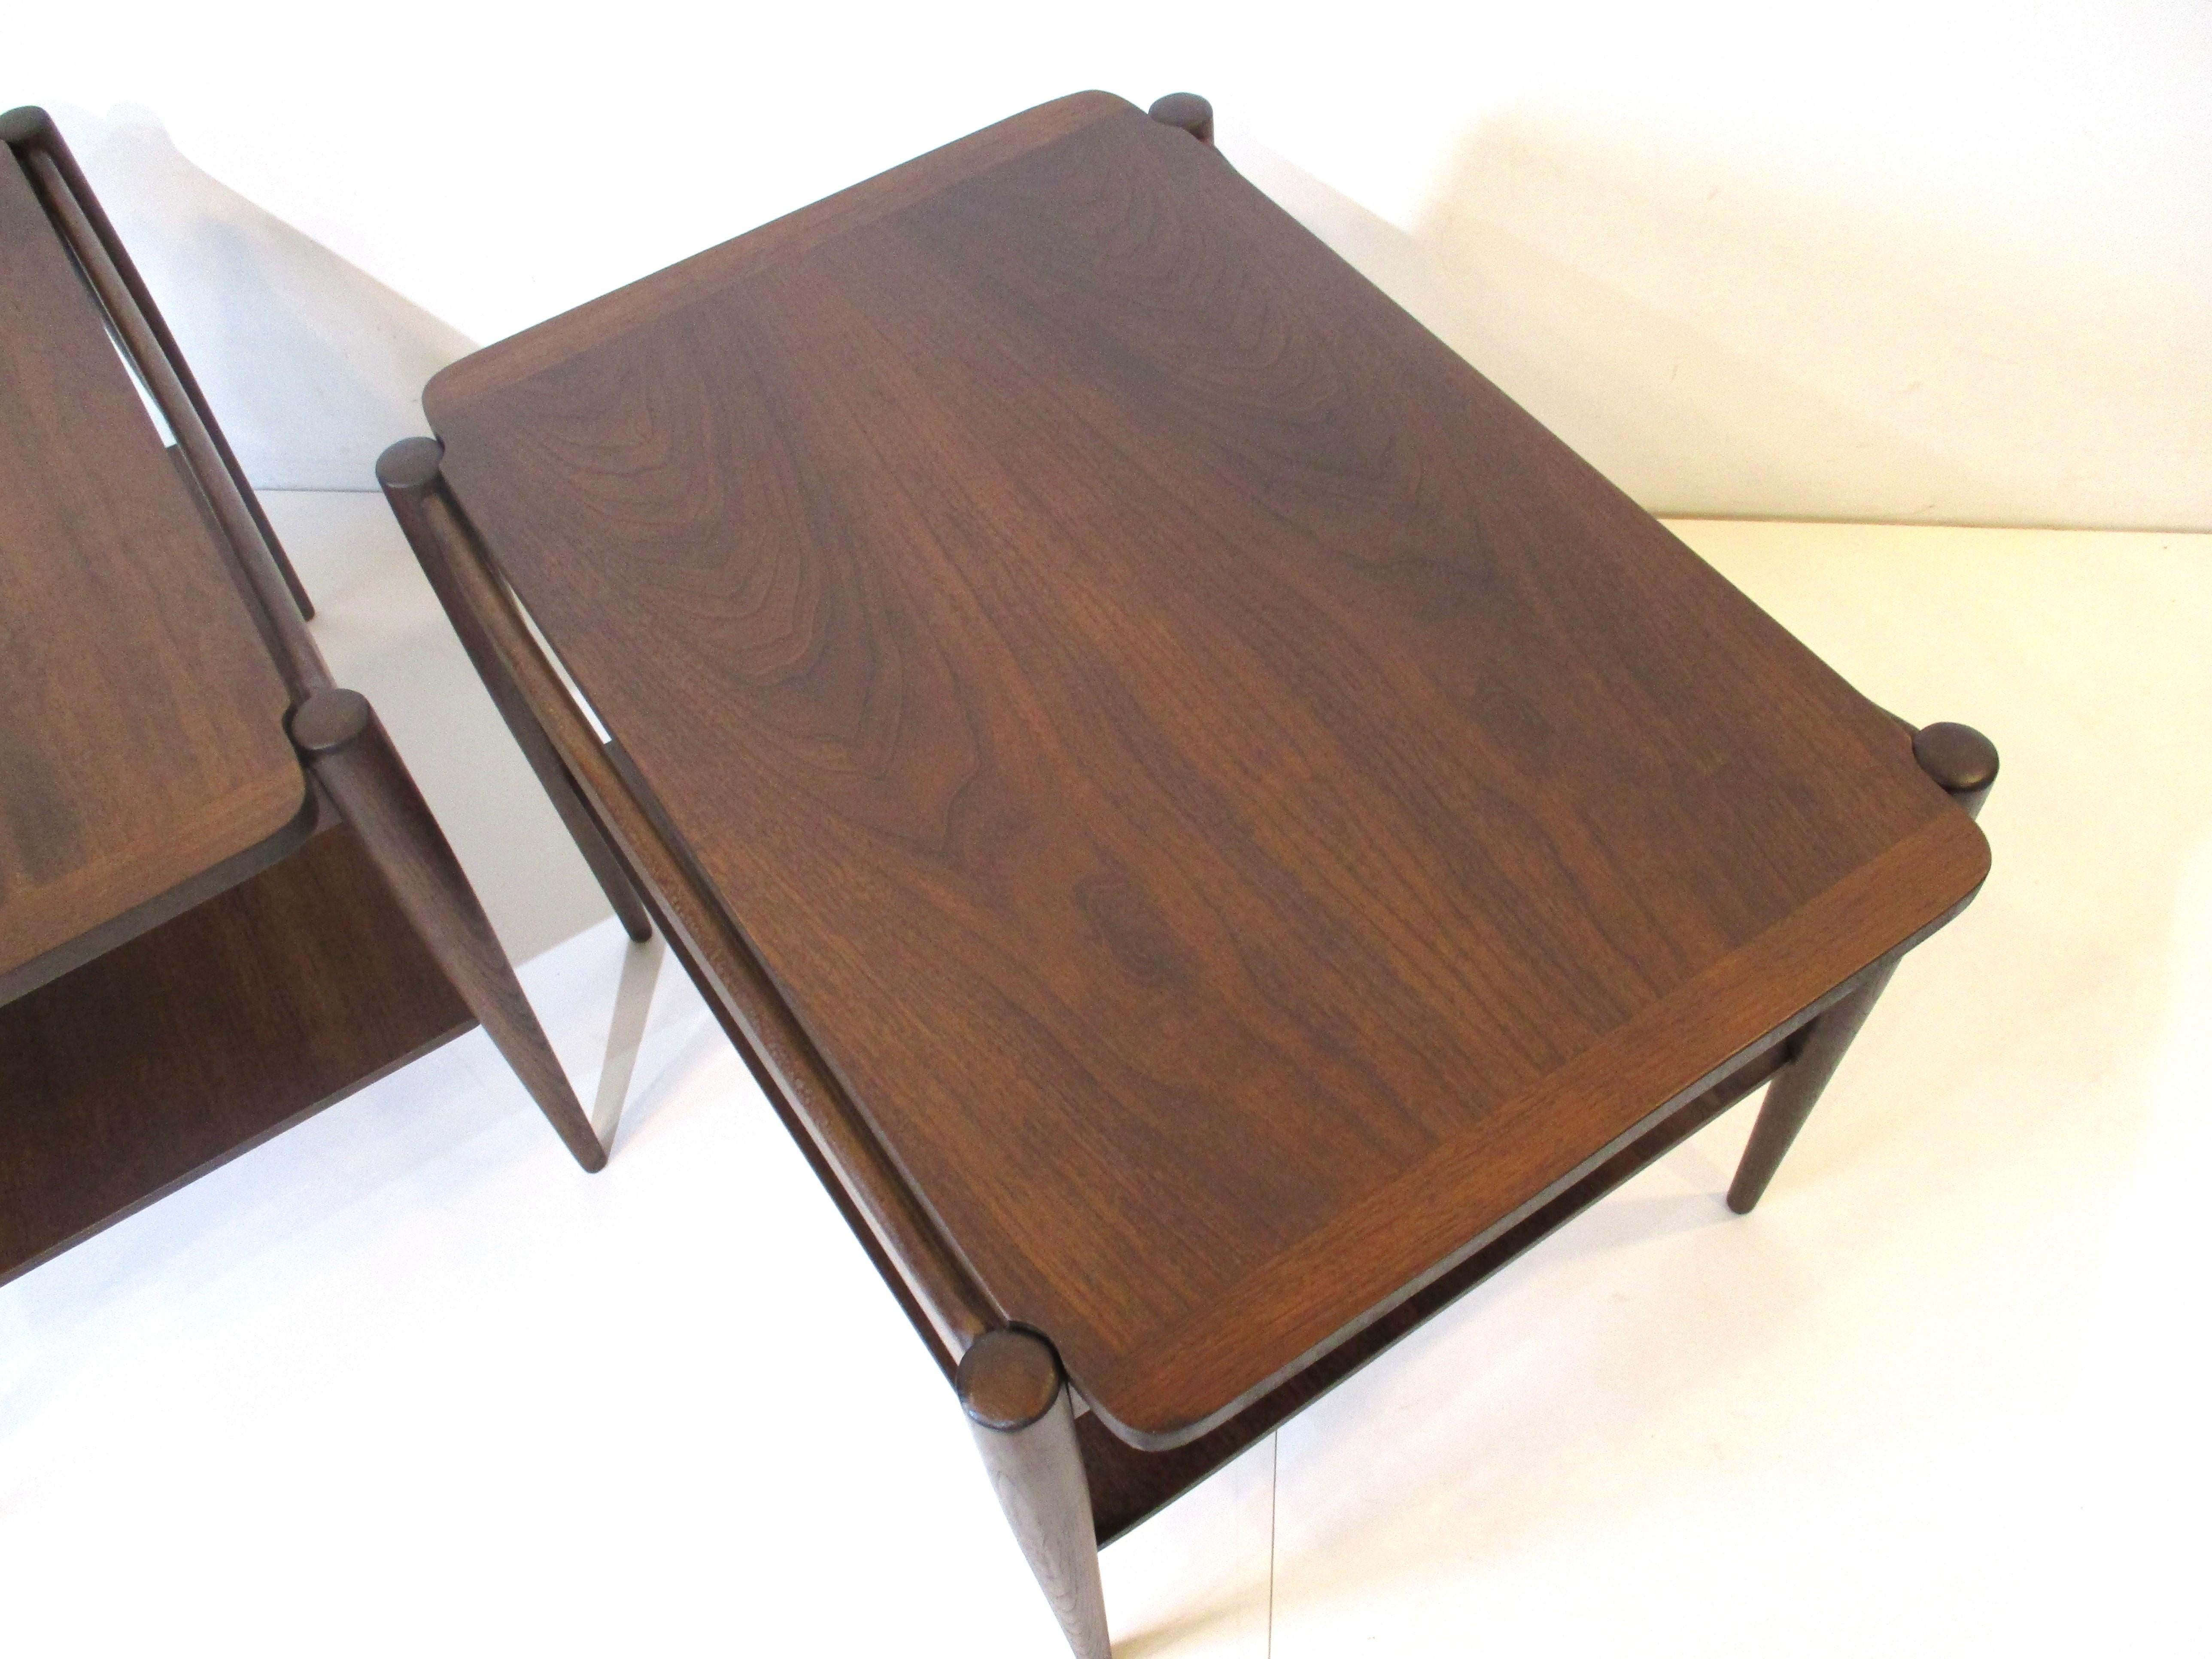 American Midcentury Walnut End Tables by Bassett in the Style of Grete Jalk